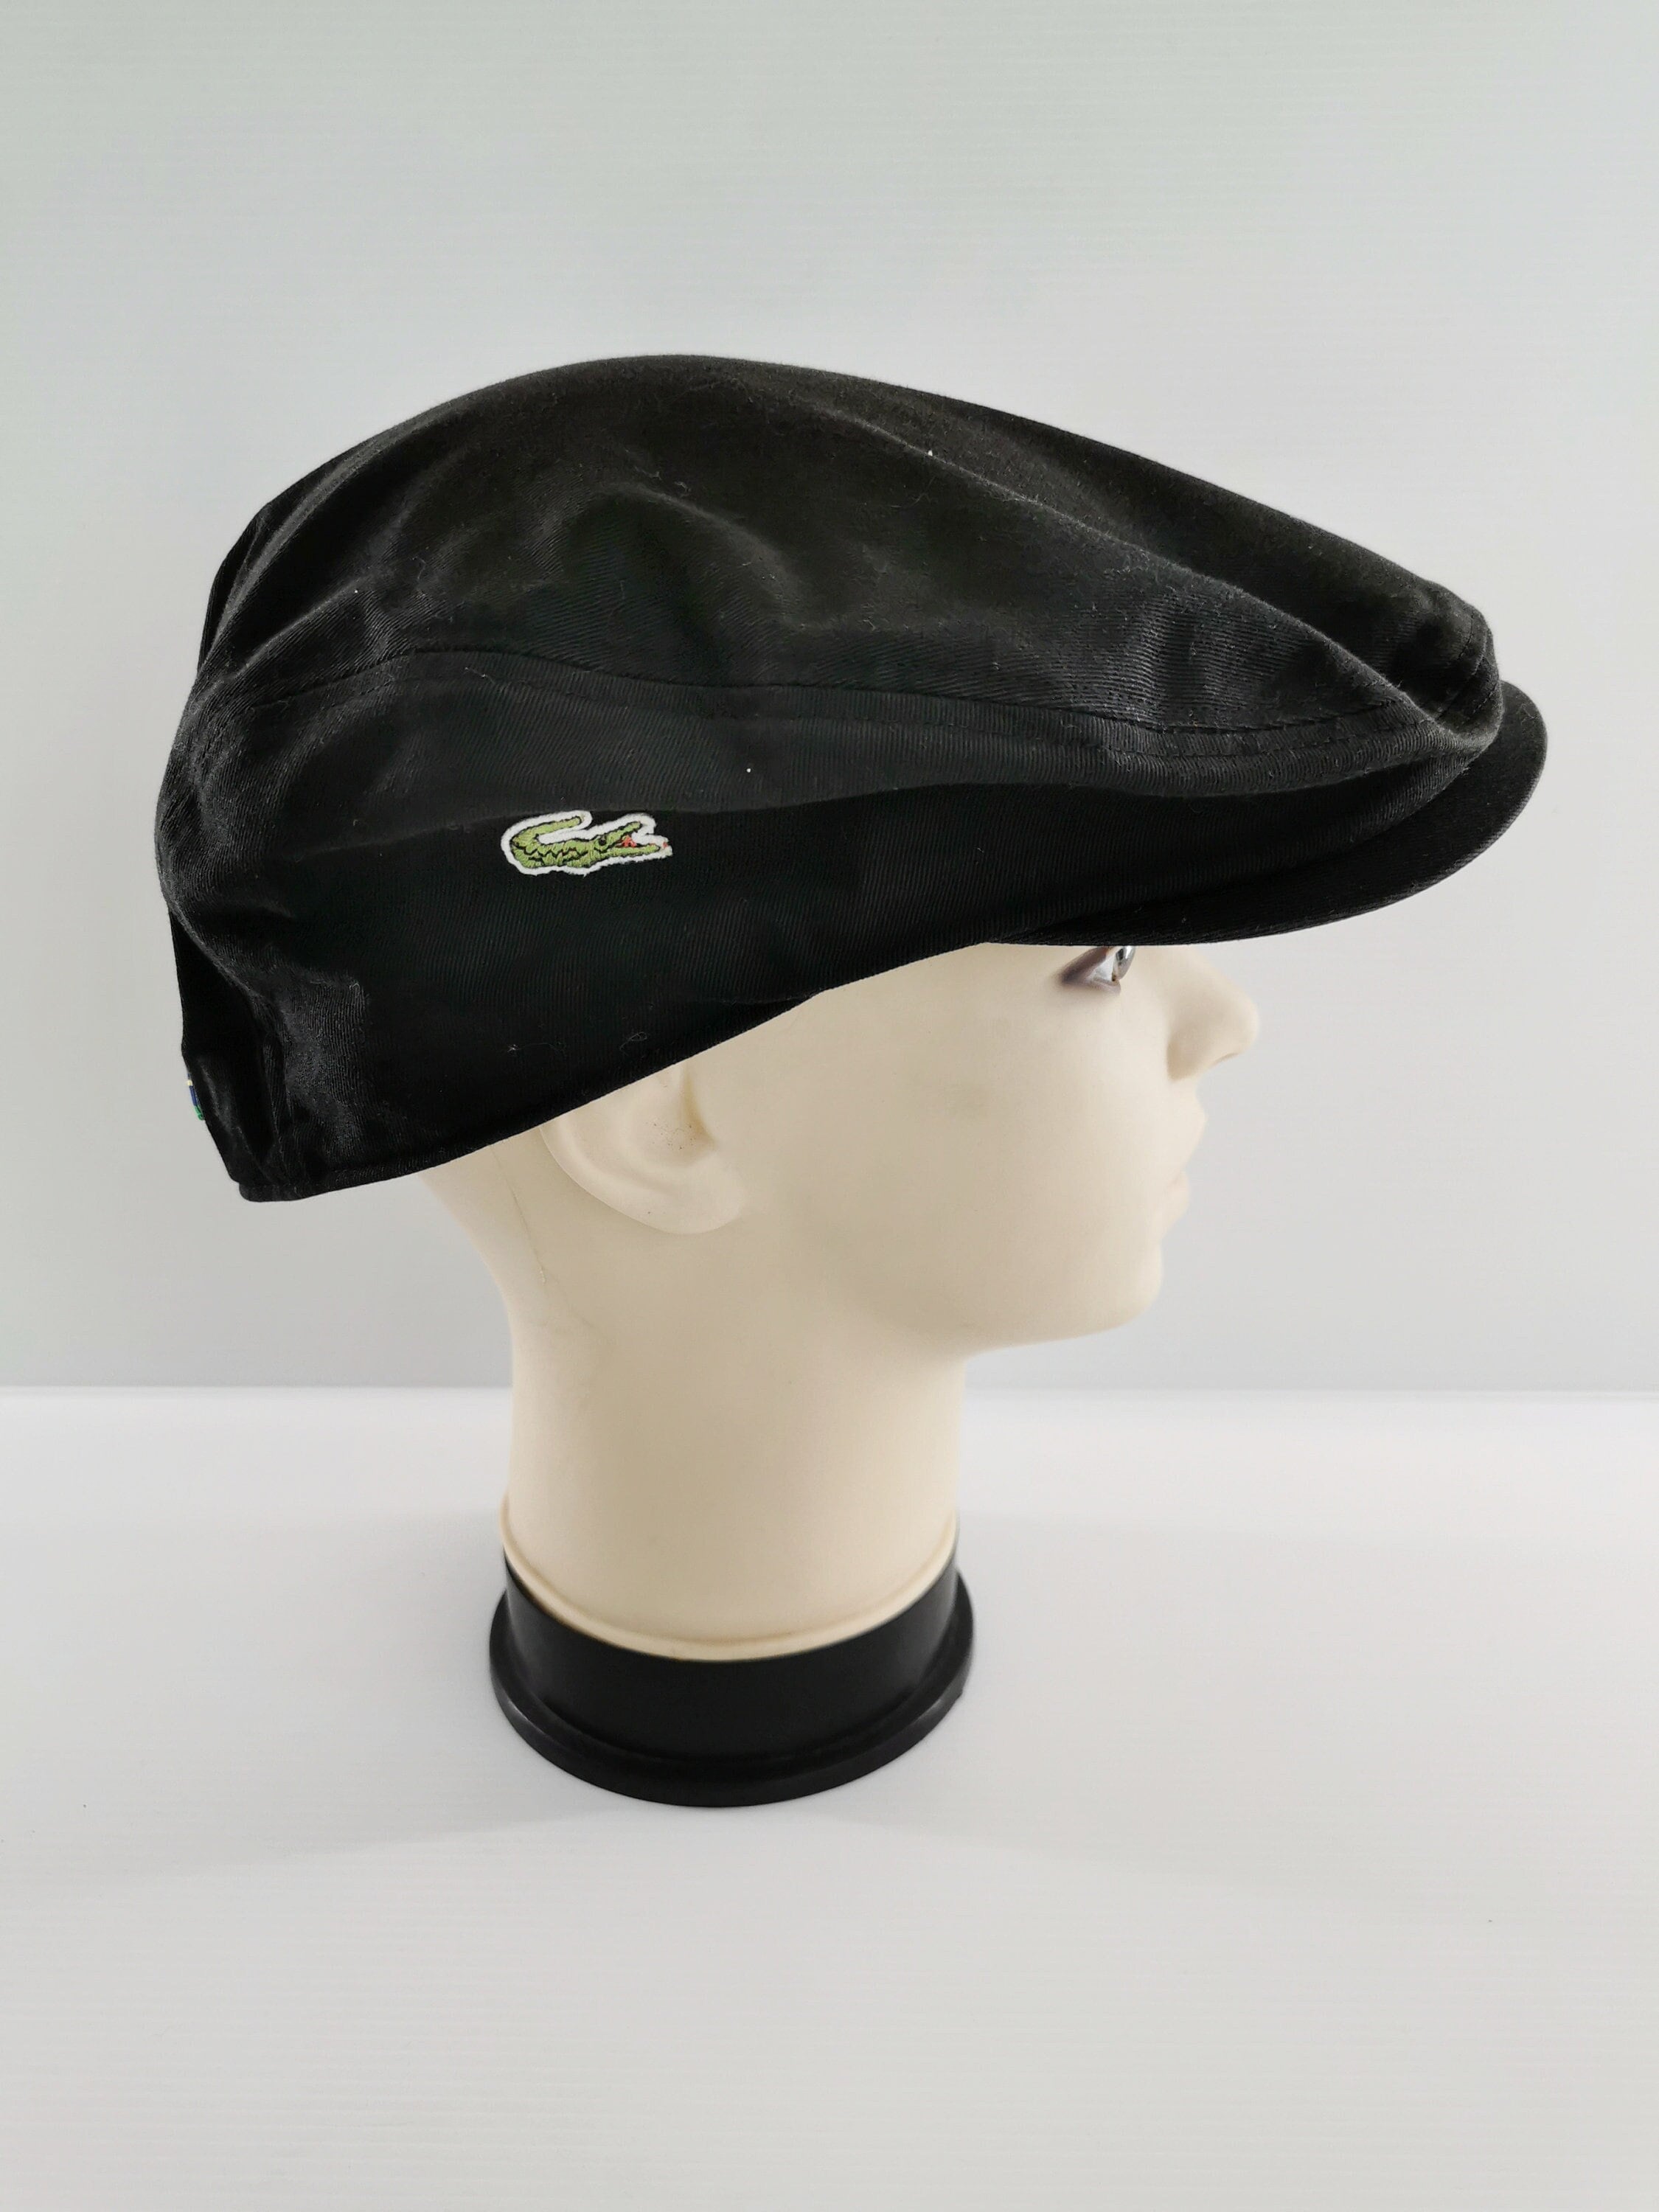 Vintage Lacoste Hat 90s Lacoste Made in Japan Flat Etsy